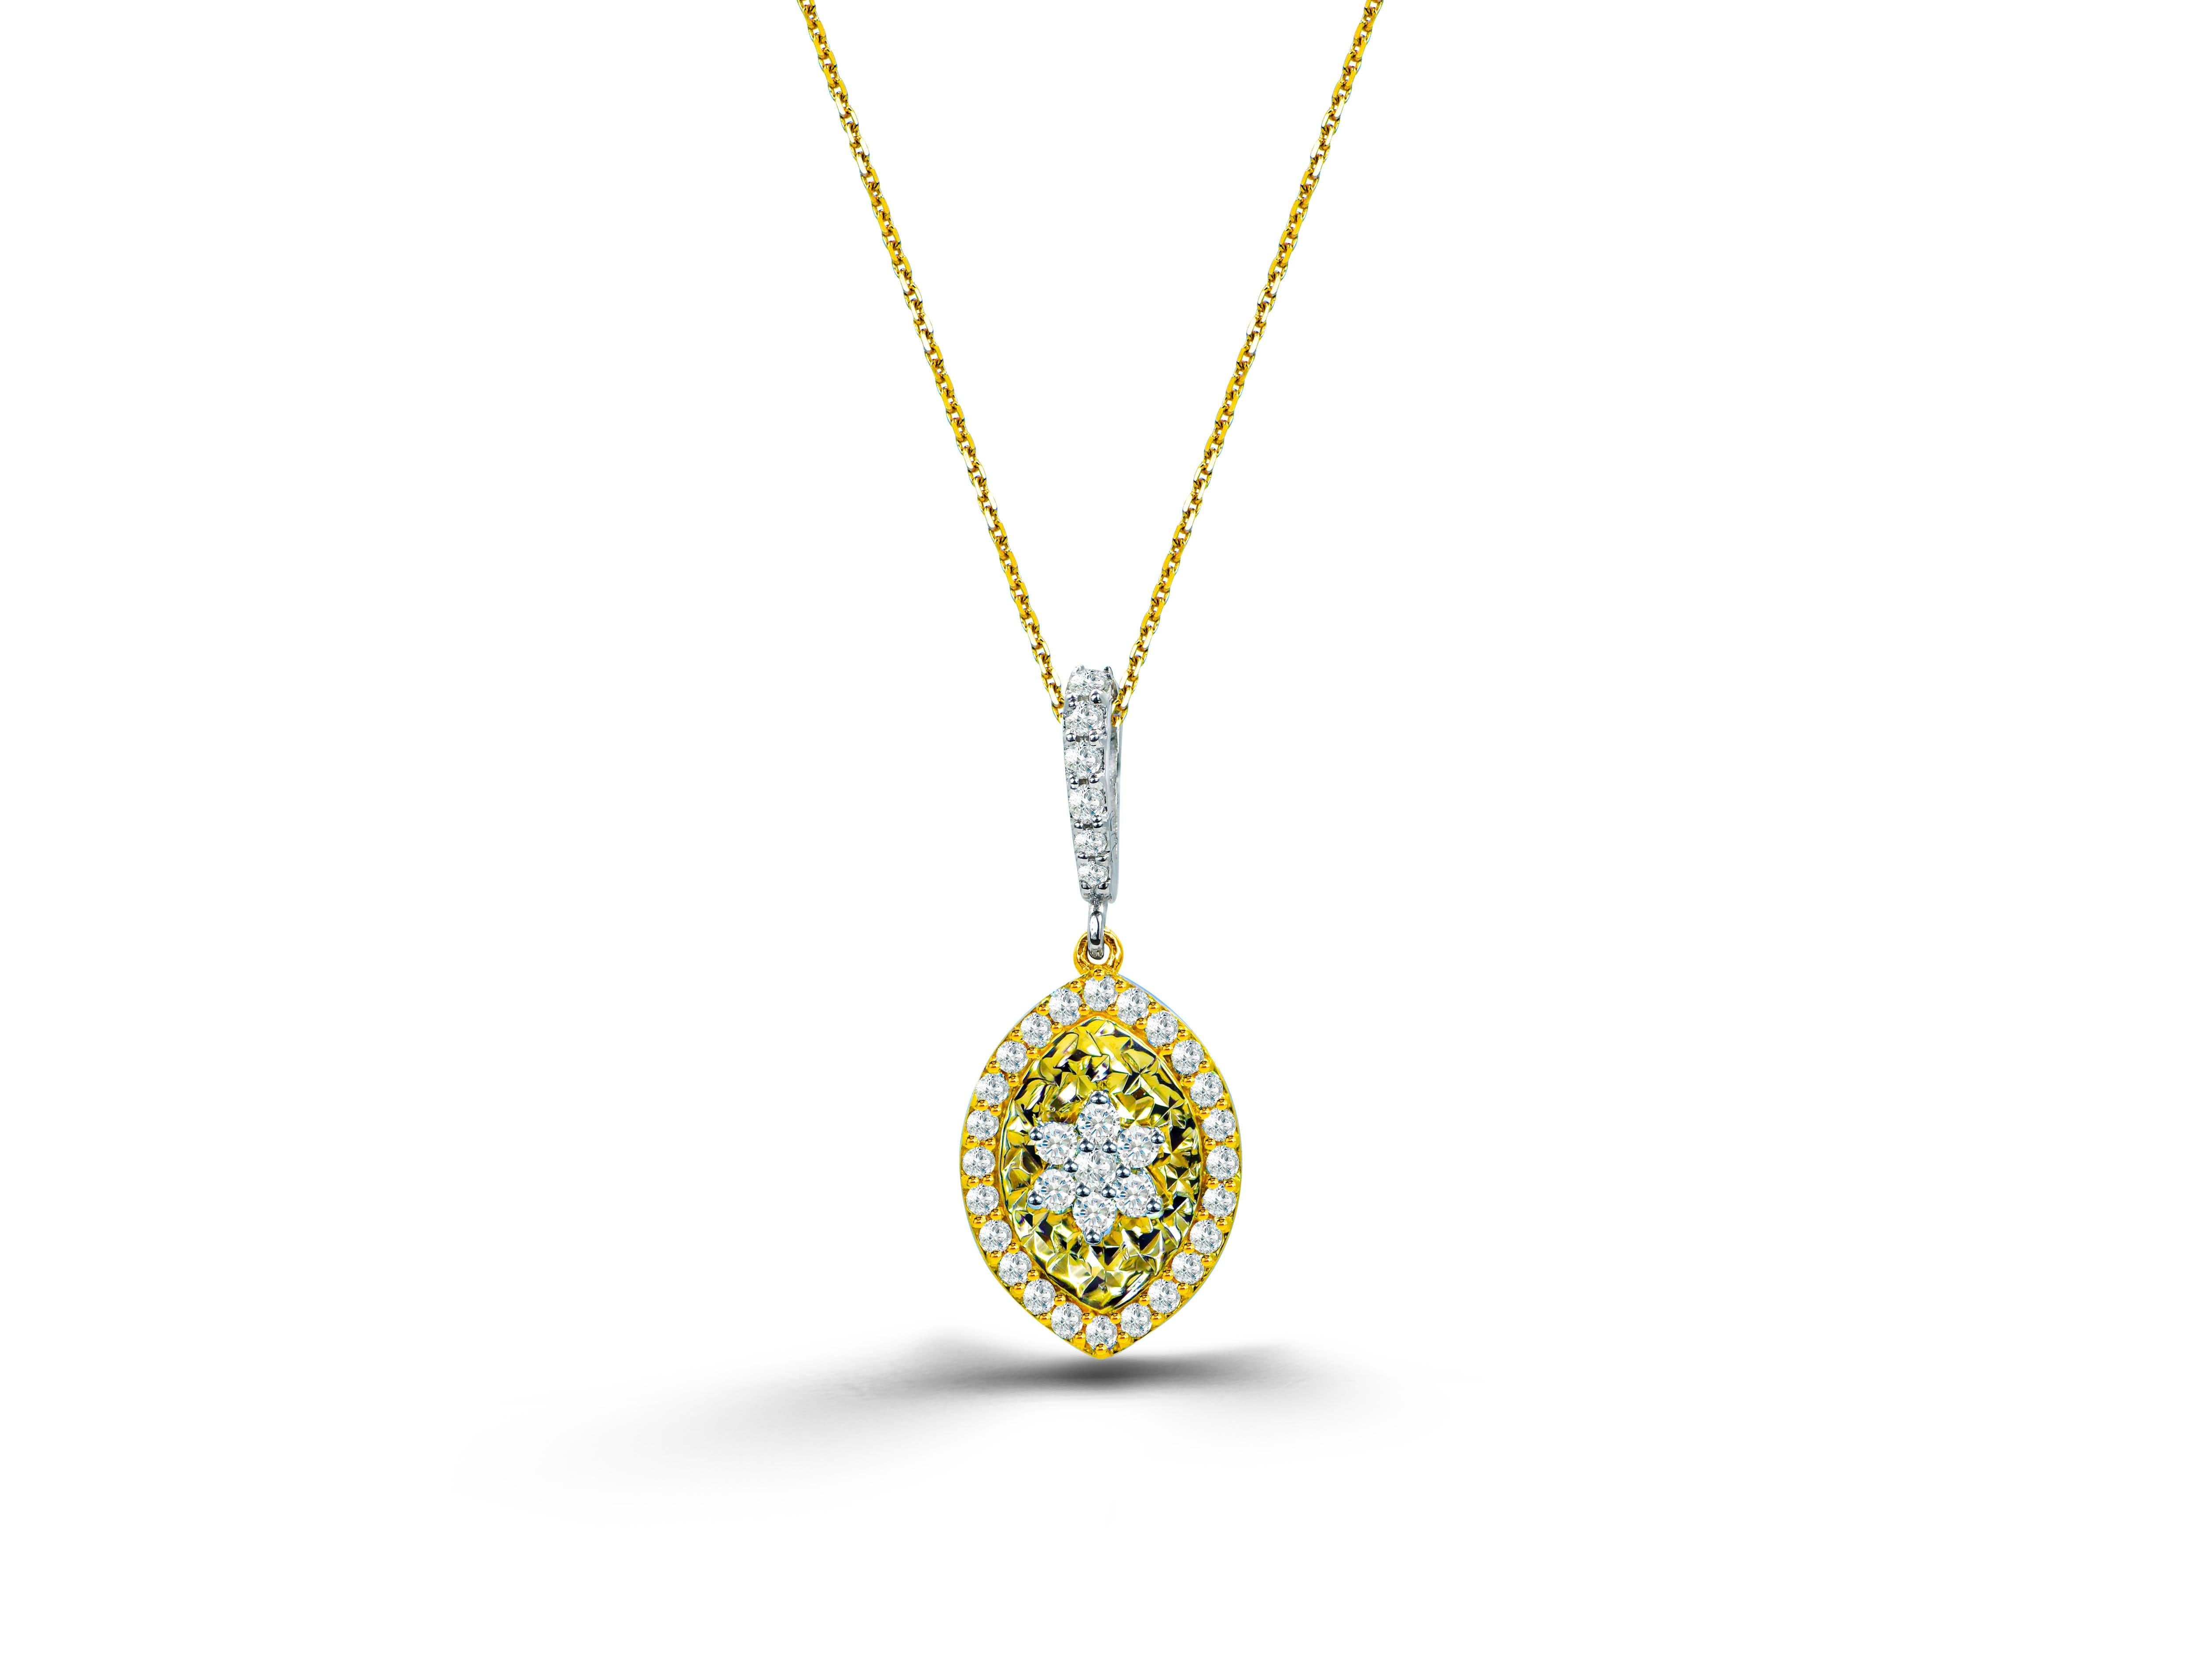 A fine jewelry piece with a modern flair, this flower pendant necklace is our original design featuring a sparkling pave diamond setting of 27 white diamonds. and hangs picture style on a 17” cable link chain in matching gold with lobster clasp